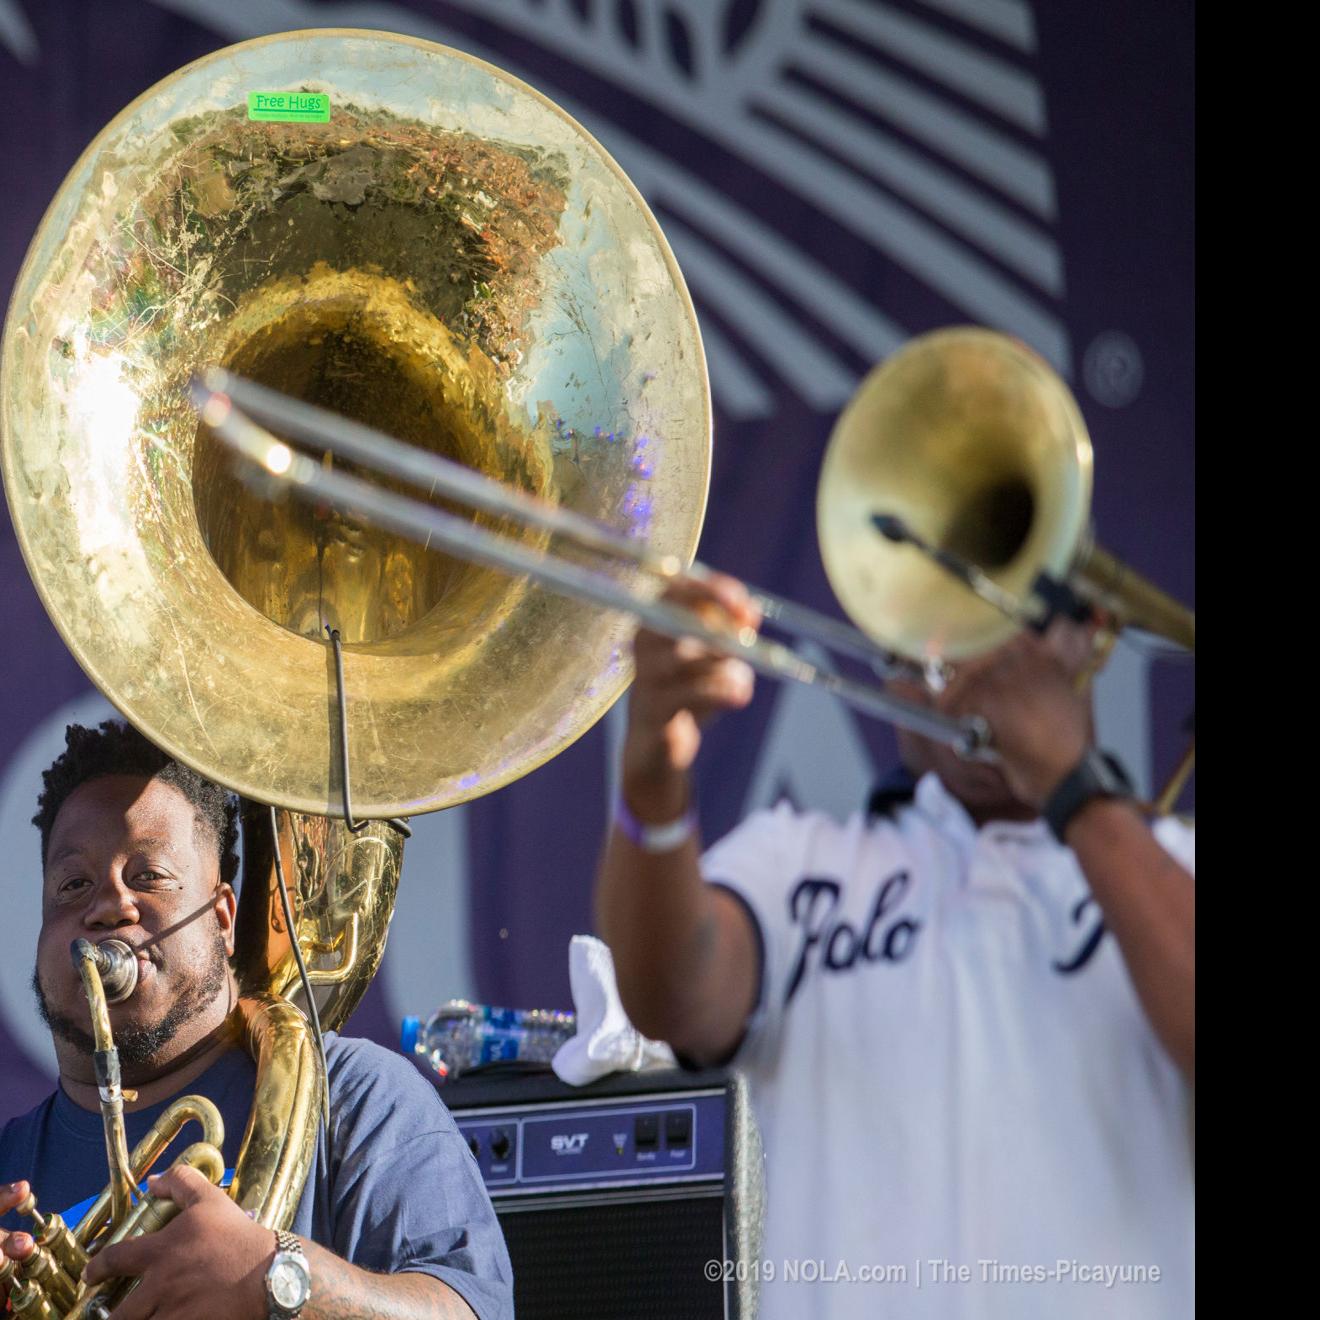 Video: Four defining eras in the history of New Orleans brass band